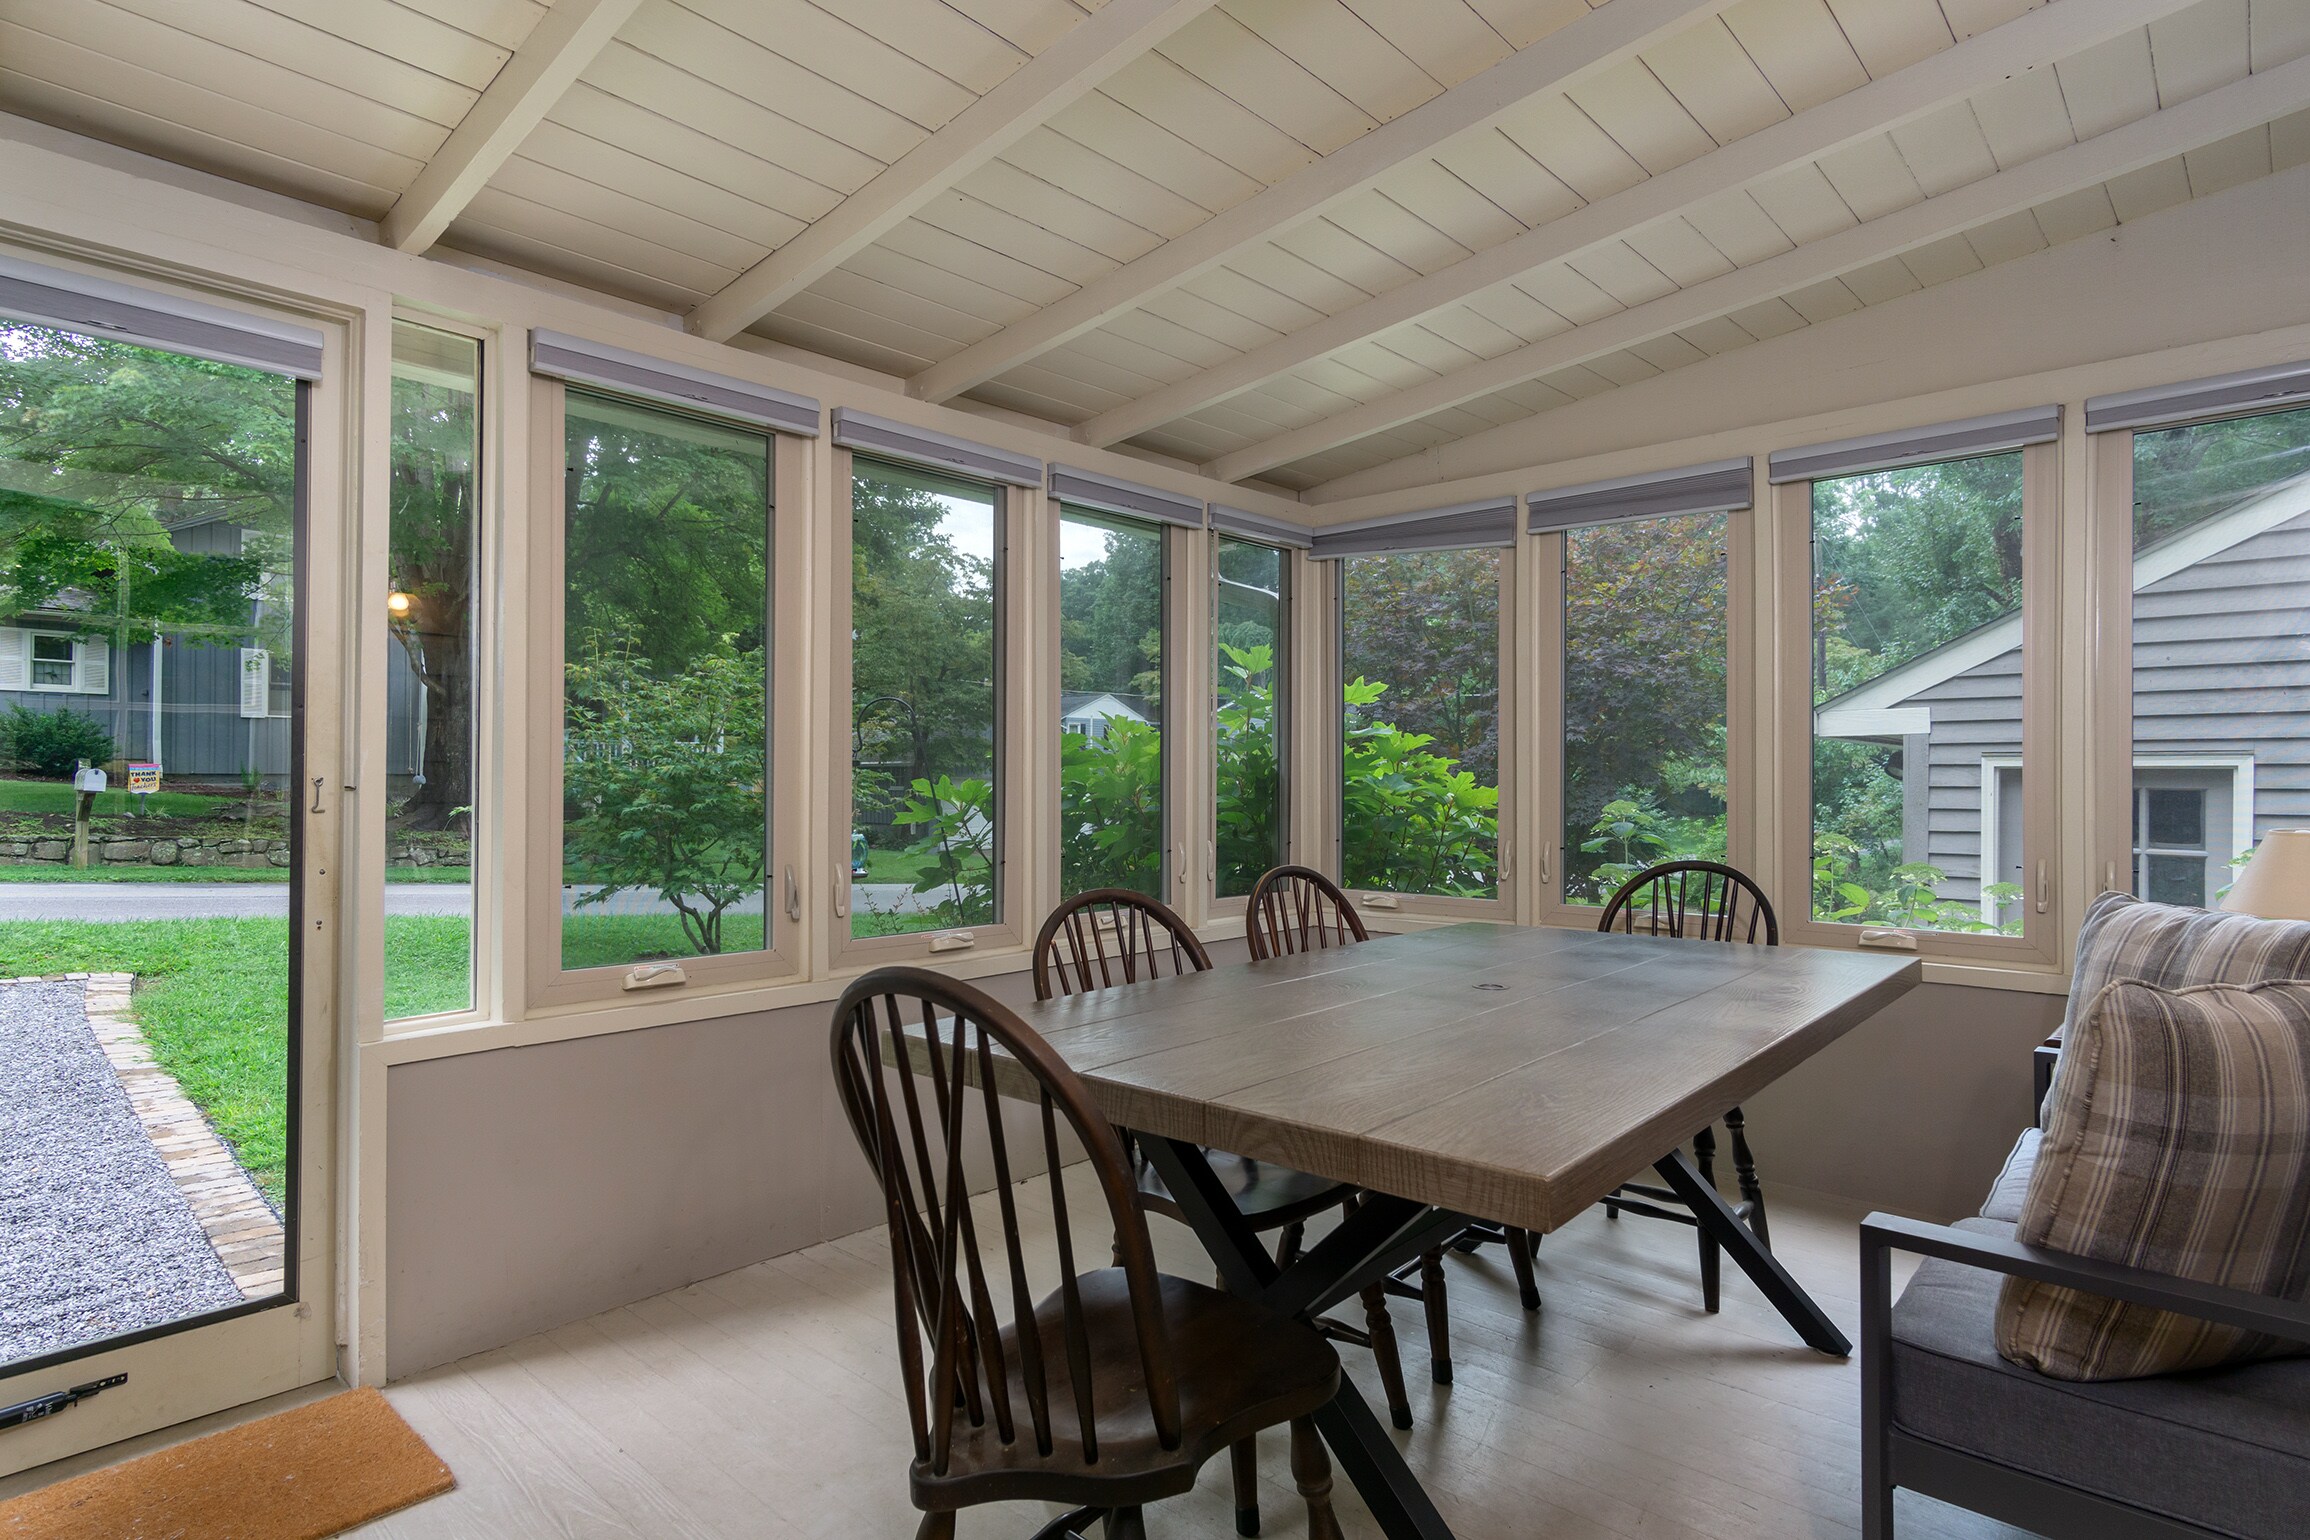 Relax or dine in the three-season room with casement windows.